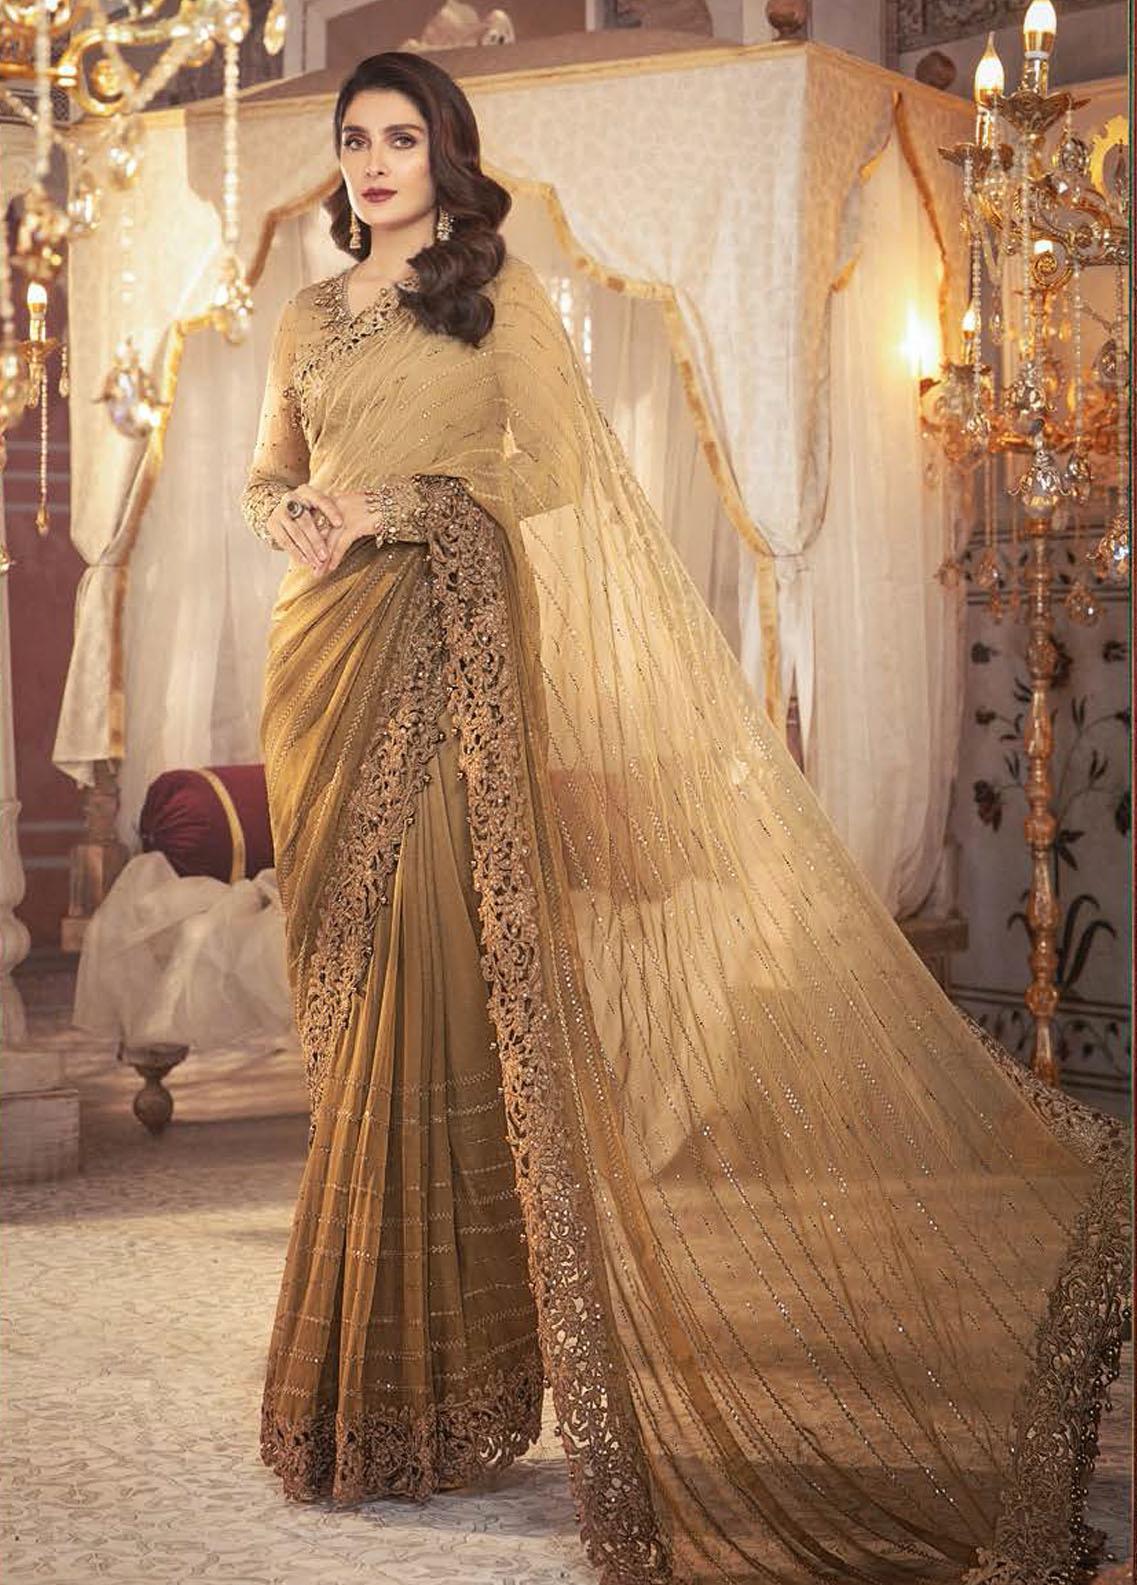 Mbroidered By Maria B Embroidered Chiffon Saree Unstitched 3 Piece D6 Chocolate Cappuccino – Wedding Collection